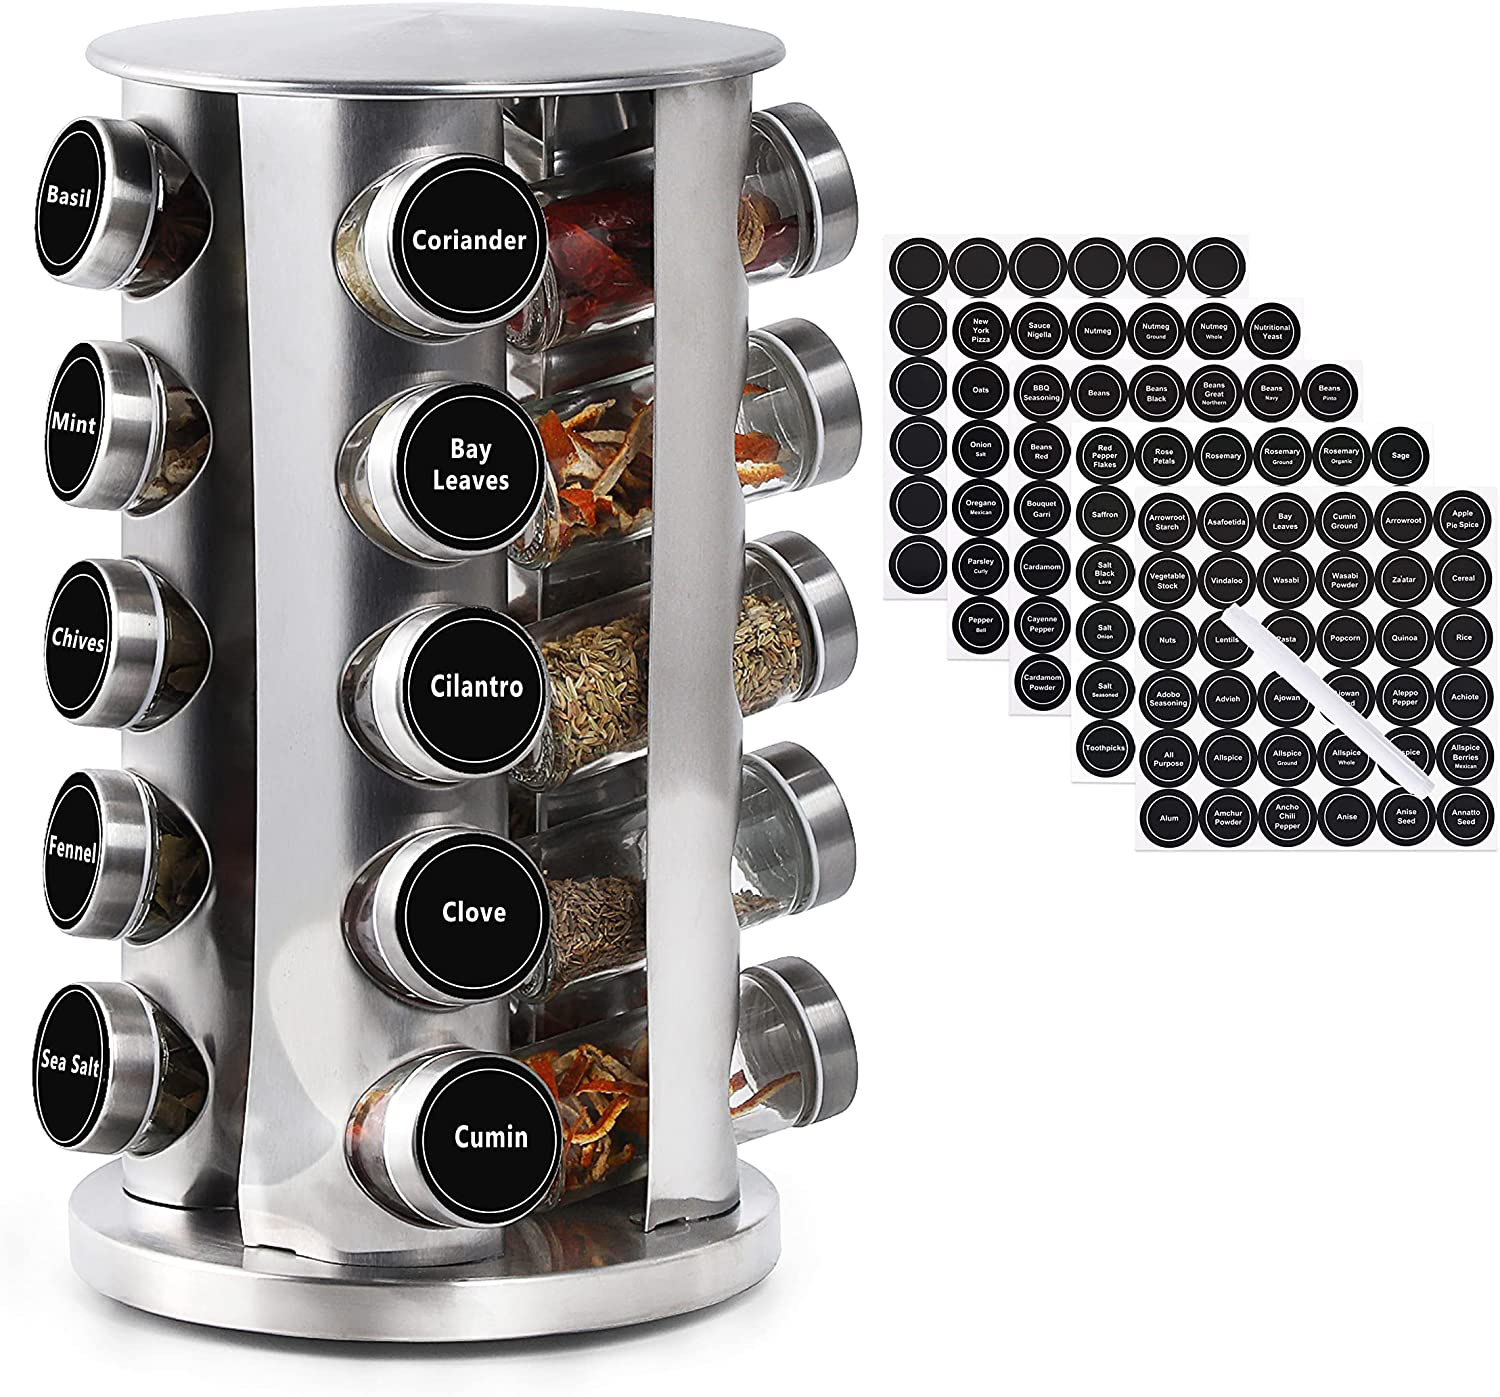 Kamenstein Heritage 16-Jar Revolving Pre-Filled Countertop Spice Rack  Organizer Stainless Steel with Free Spice Refills for 5 Years 